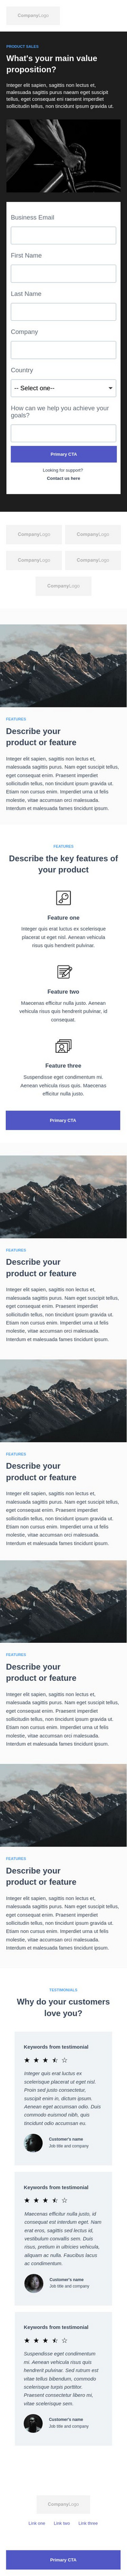 SaaS and Internet Instapage Layout 3